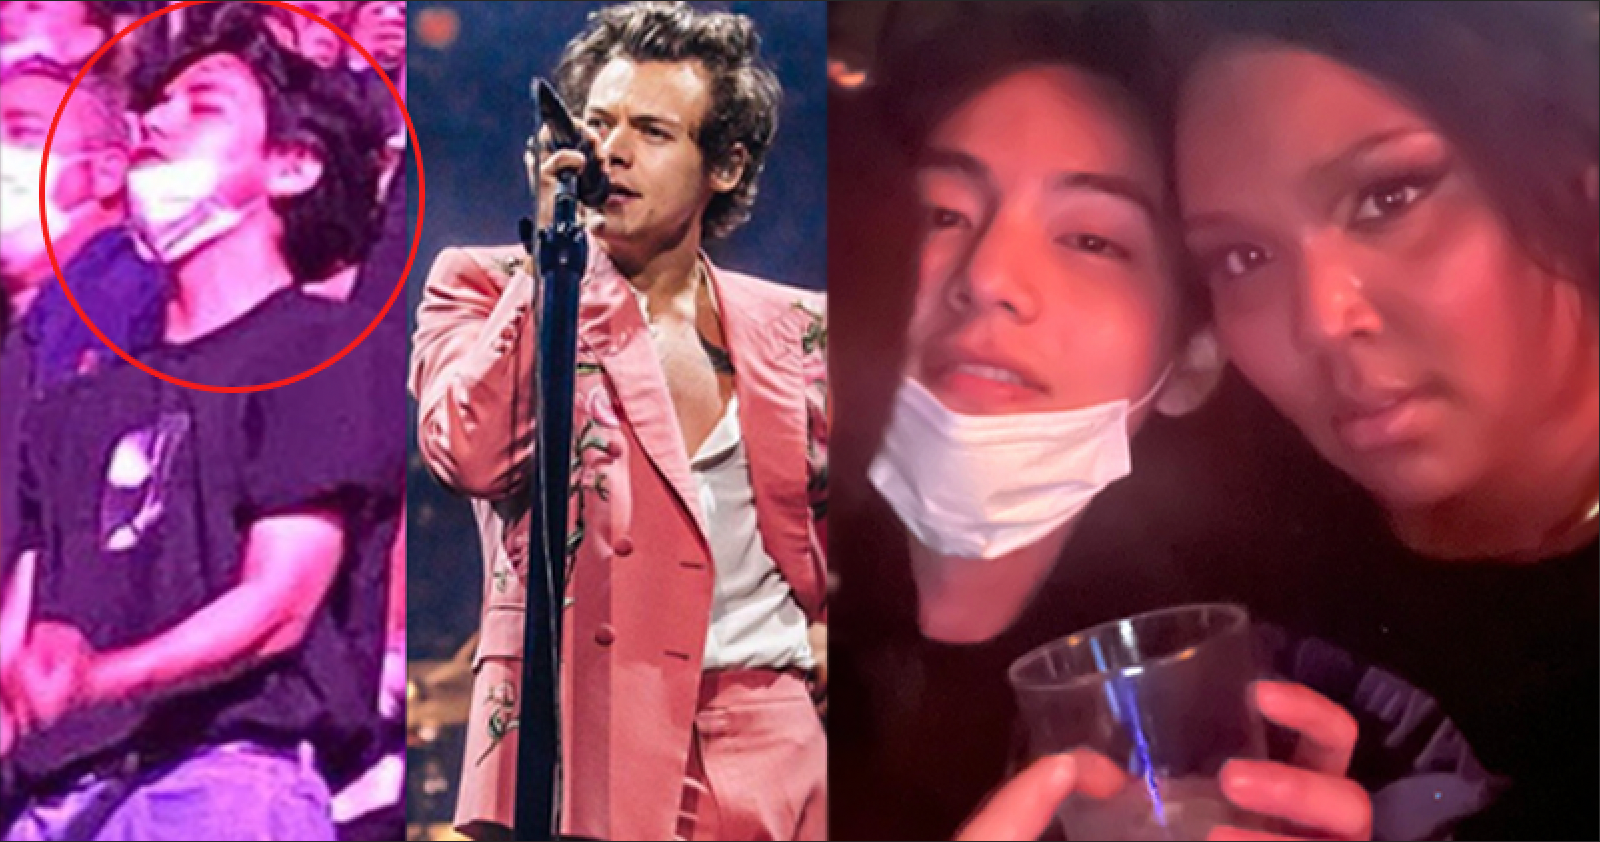 BTS V was too much for being the 'life of the party' at Harry Styles' concert